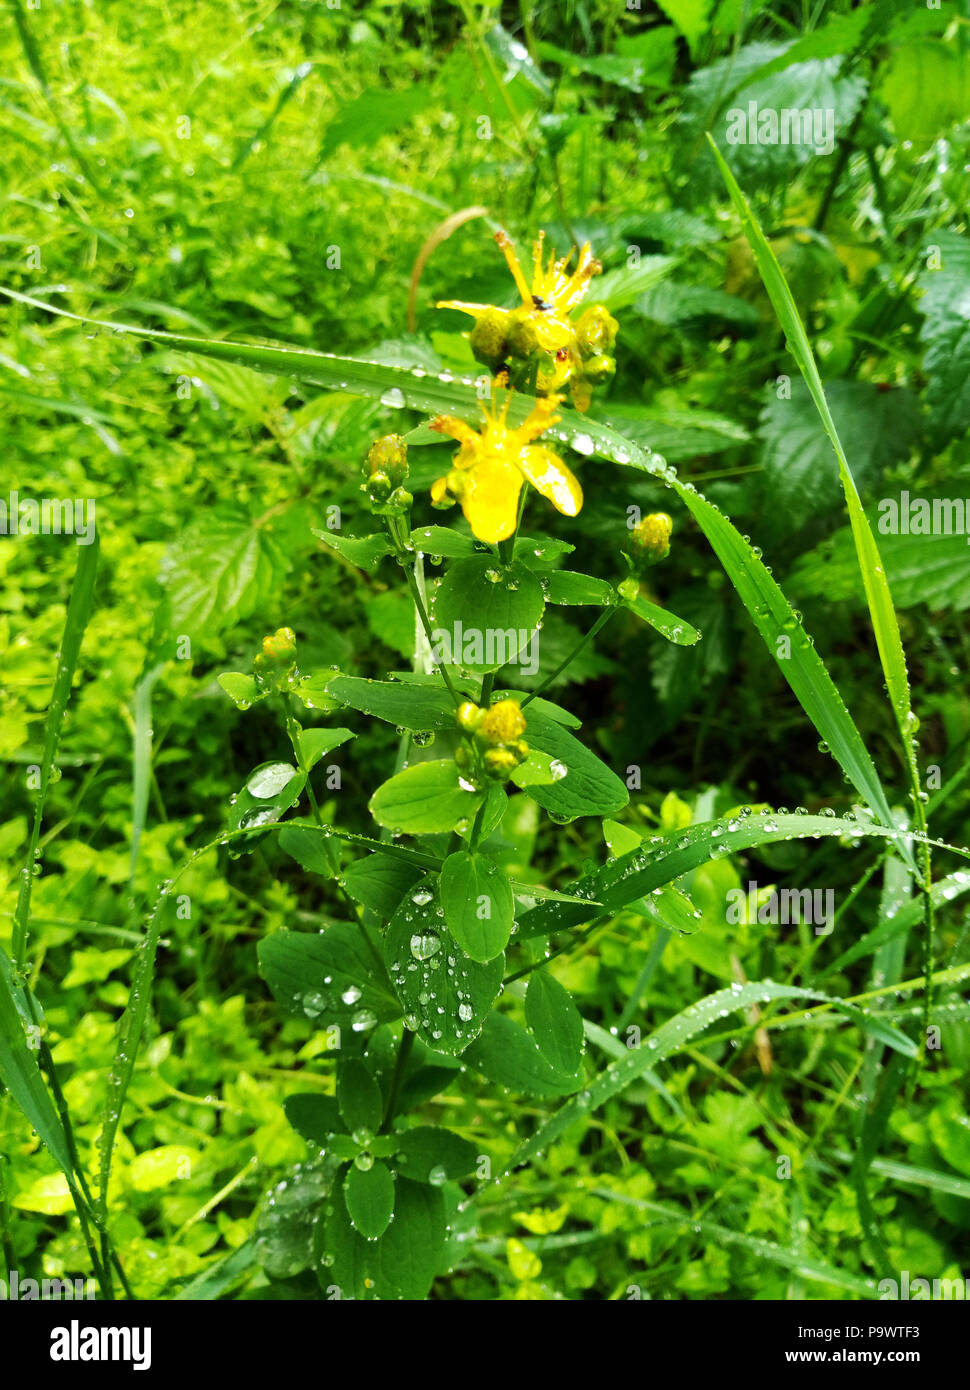 Flowering yellow celandine plant in forest Stock Photo